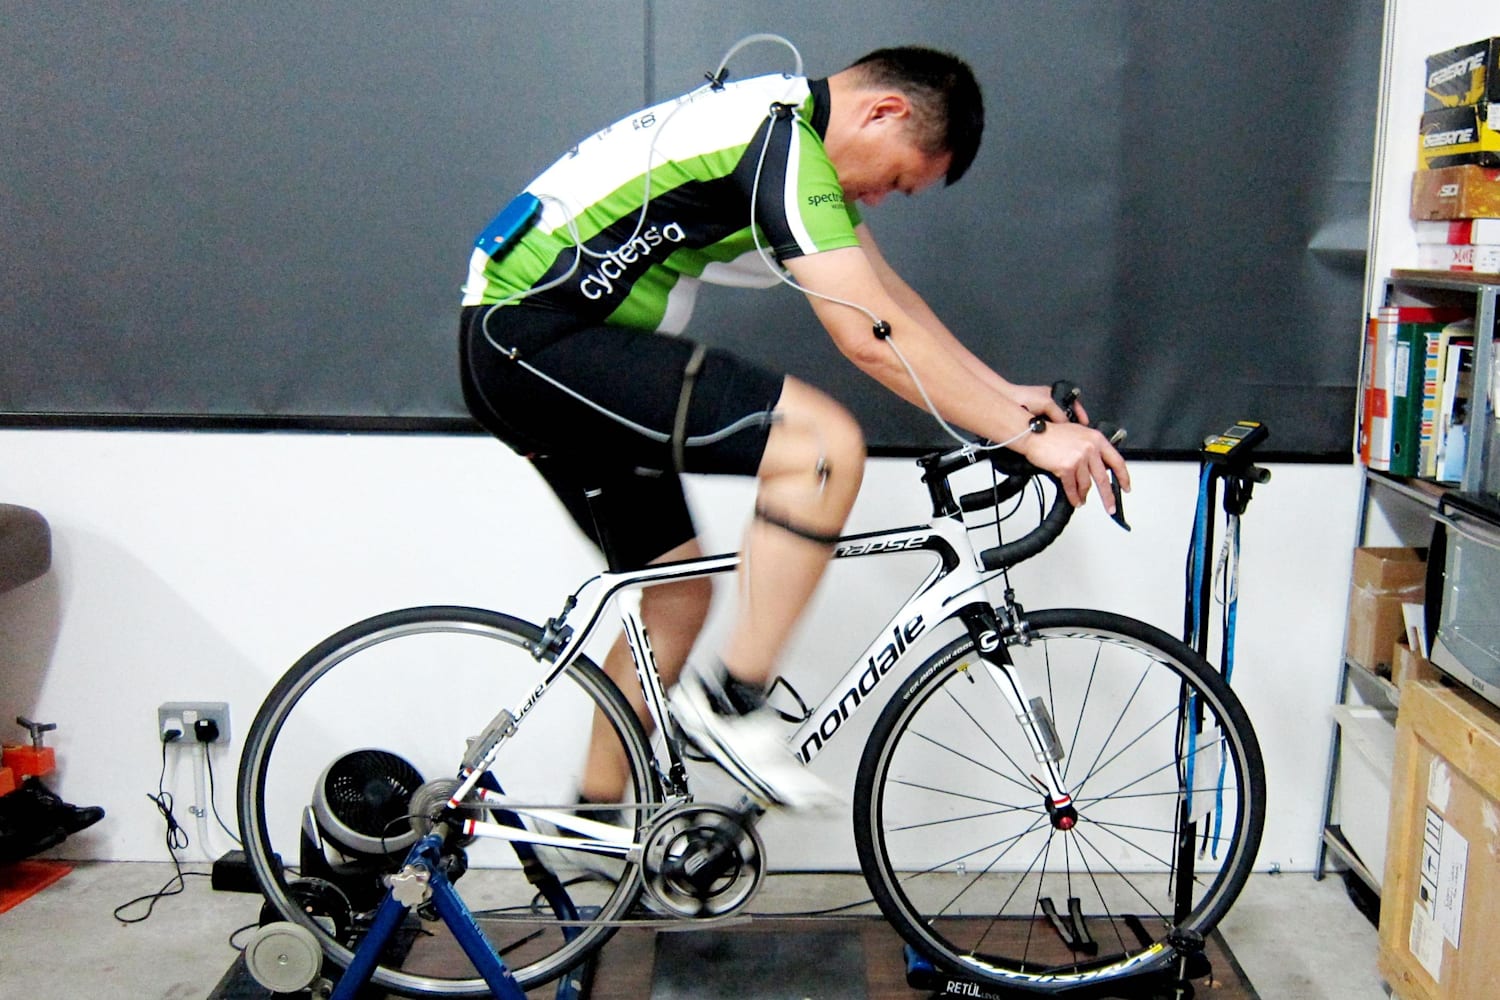 Bike fitting: What does it involve, and do you need it? - Bike Fitting Is Suitable For Everyone